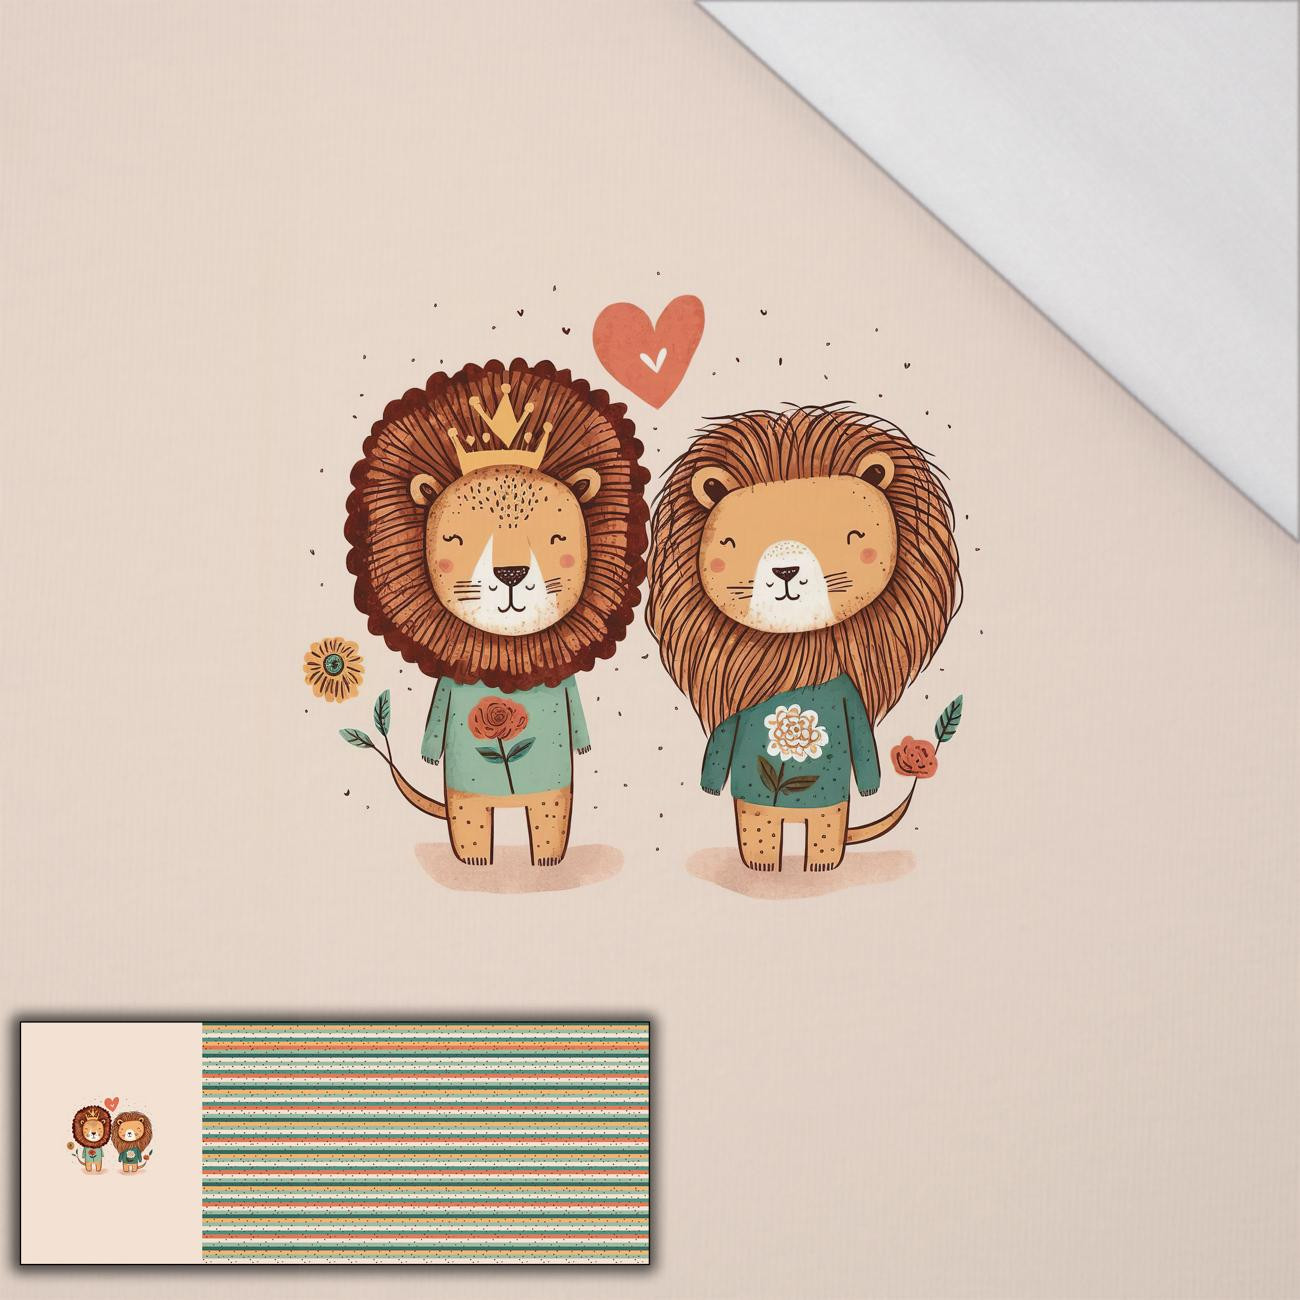 LIONS IN LOVE - SINGLE JERSEY PANORAMIC PANEL (60cm x 155cm)